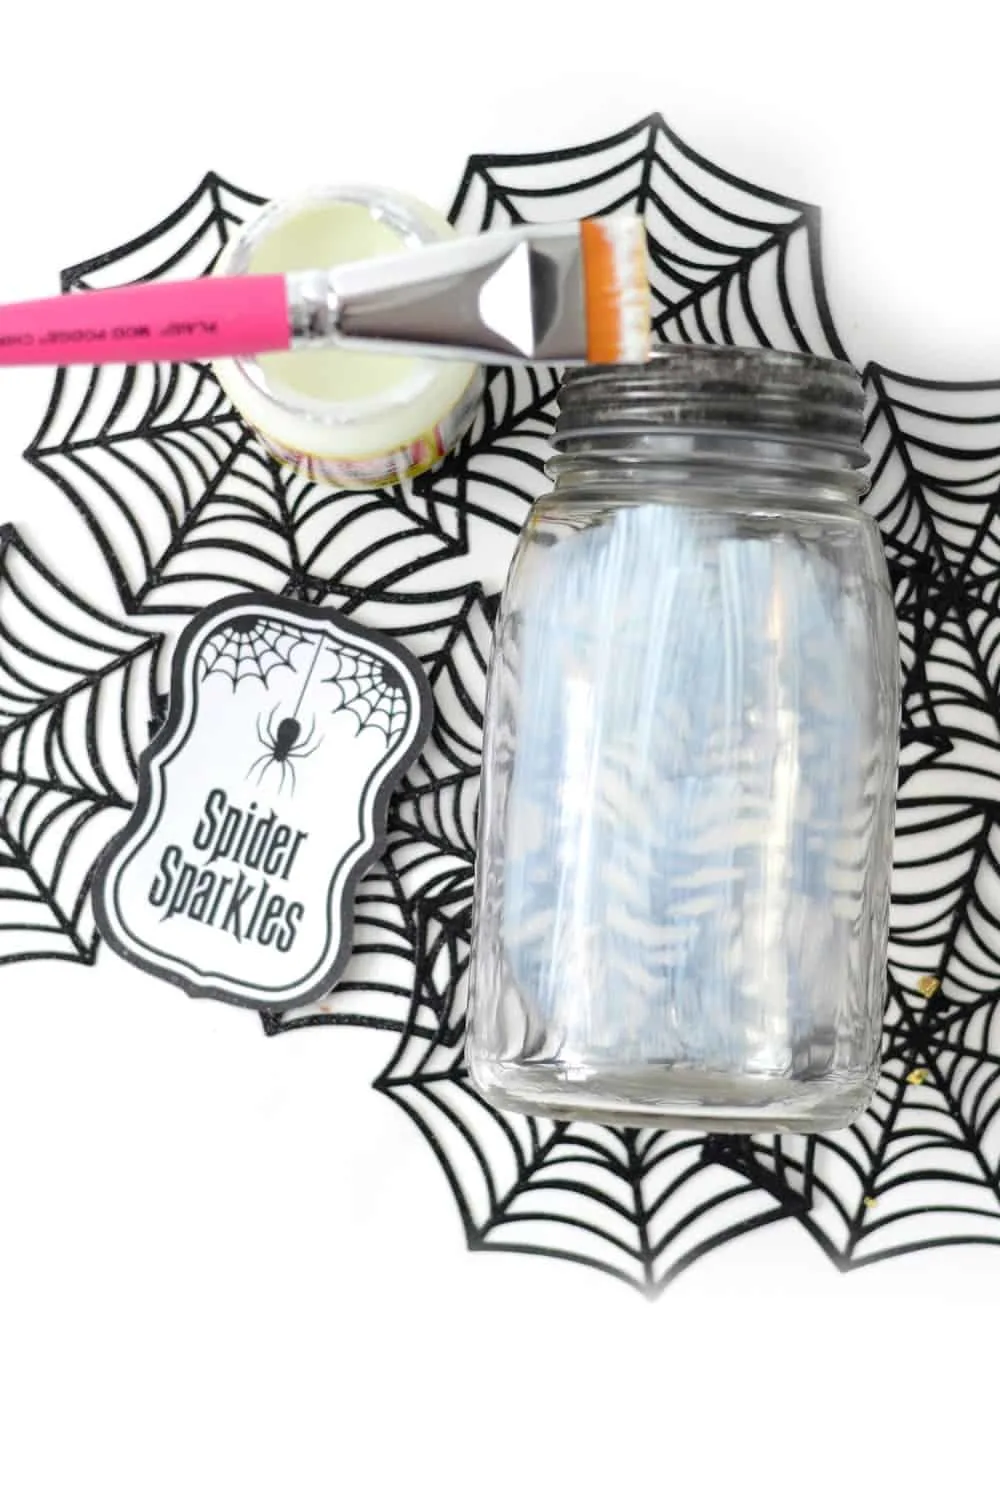 Painting a layer of glow in the dark Mod Podge onto a clear jar